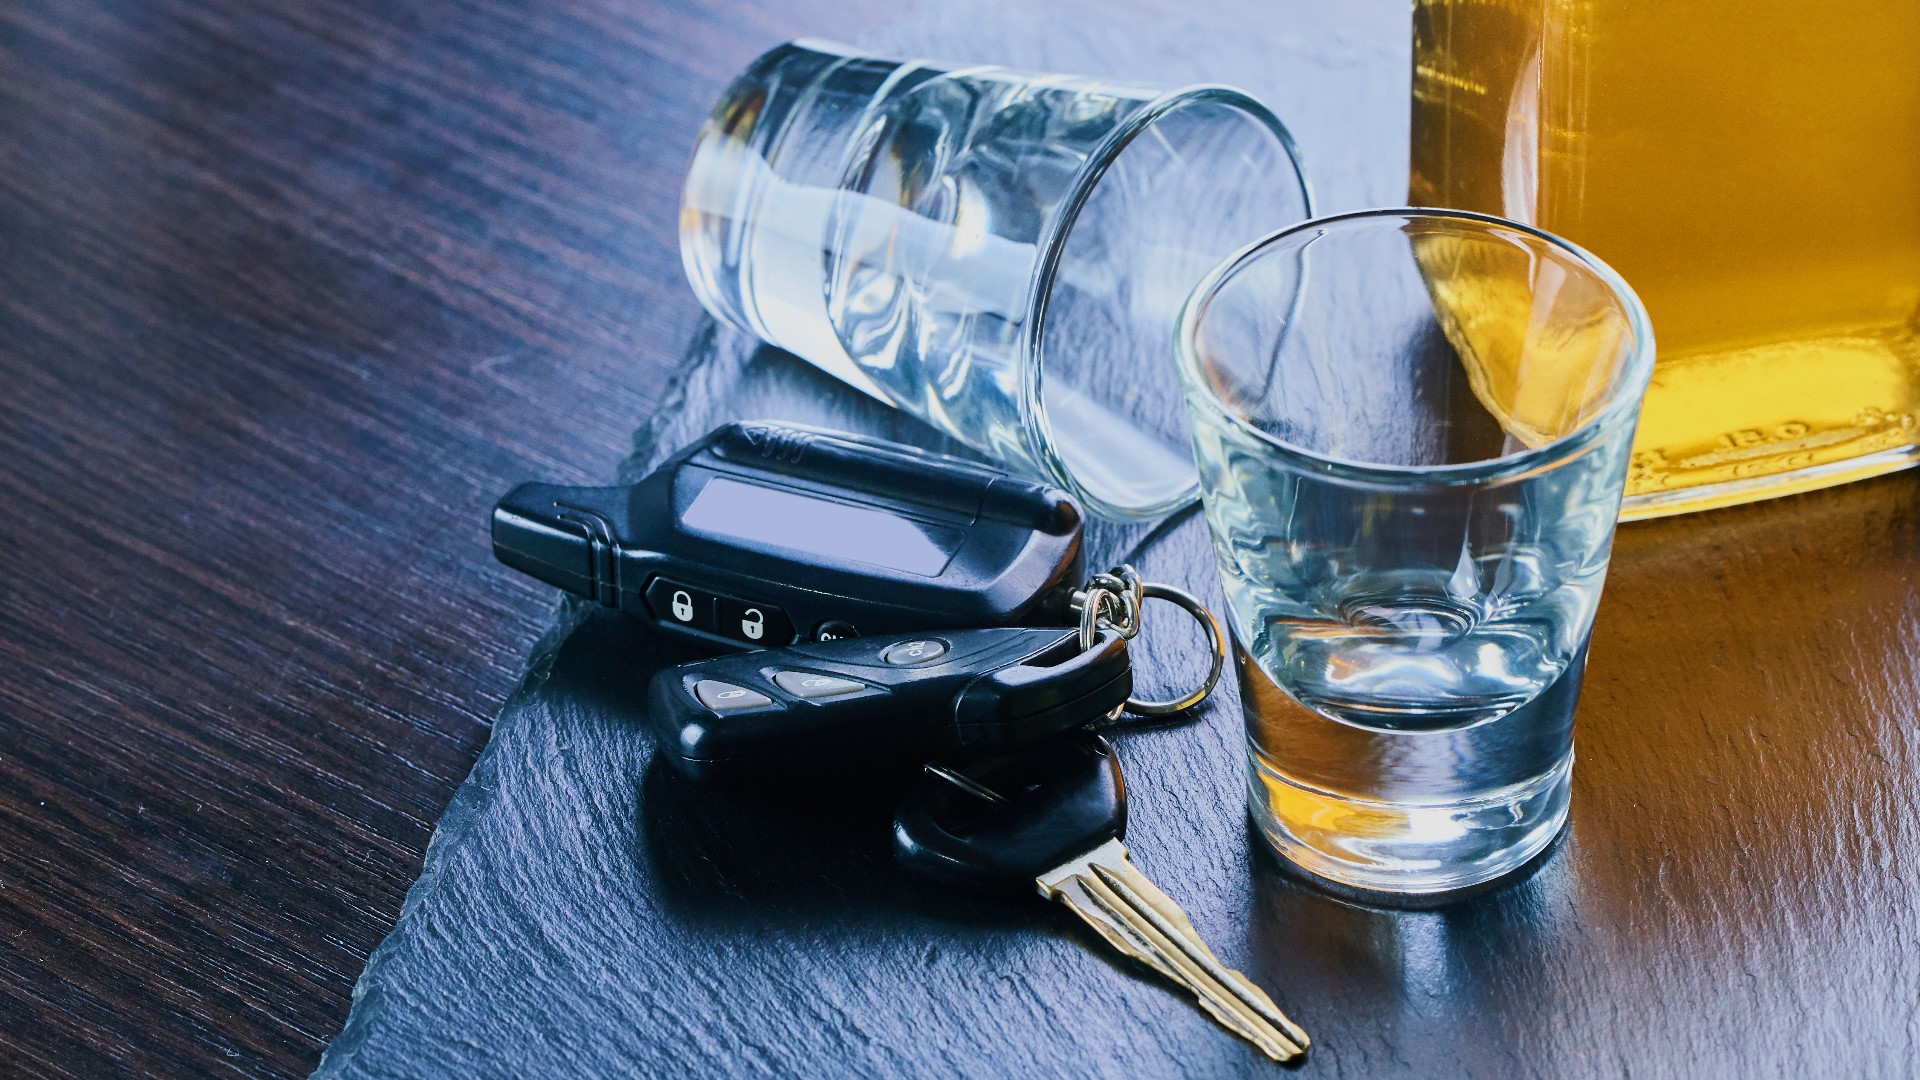 New Year’s Eve is one of the most dangerous nights of the year when it comes to driving under the influence, and a DUI conviction might hit people's wallets hard.